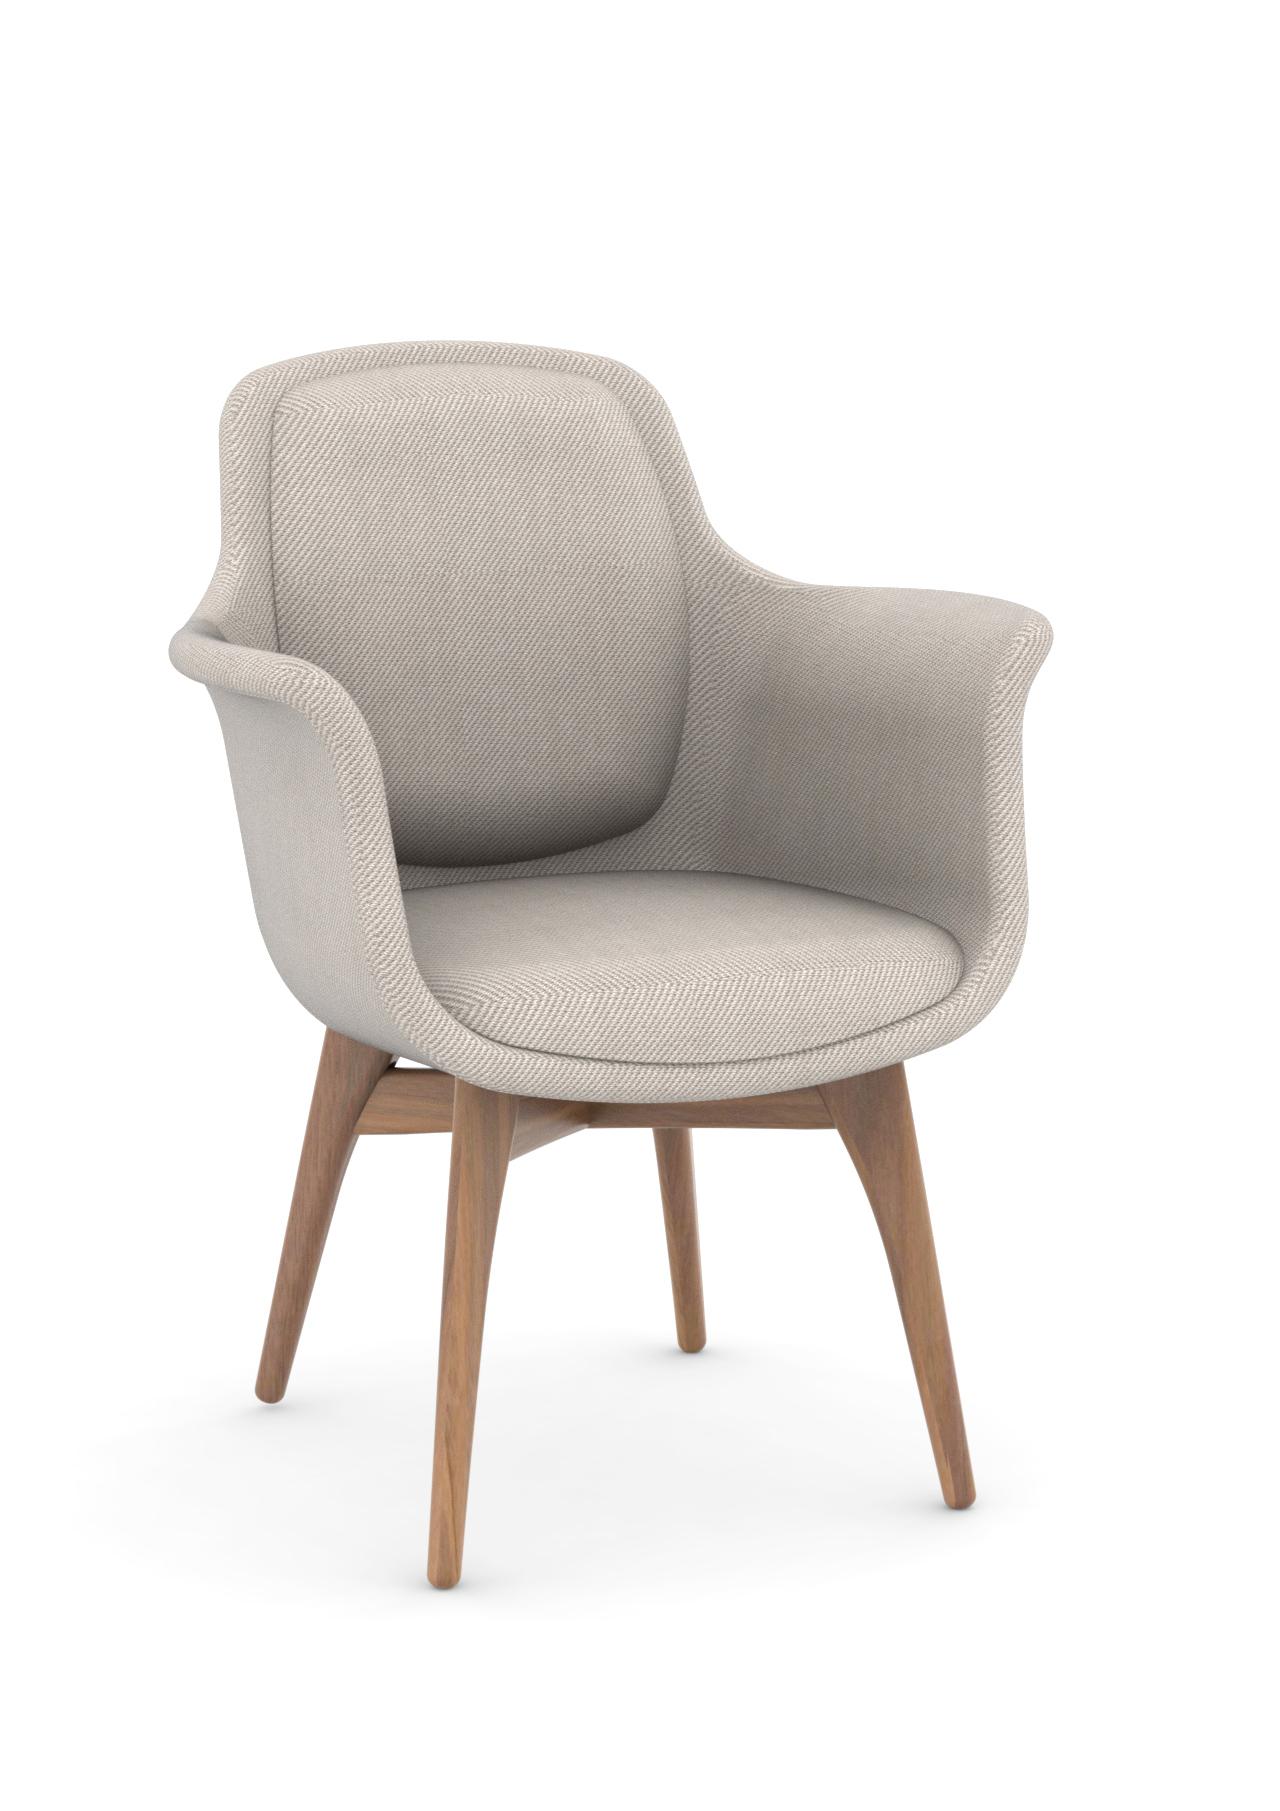 Chidden is designed by Sjoerd Vroonland & Casper Vissers for Revised
Soft, smooth curves define the beautiful shape of the Chidden Collection. Chidden offers uncompromising comfort with its subtle, integrated armrest and optional padded back